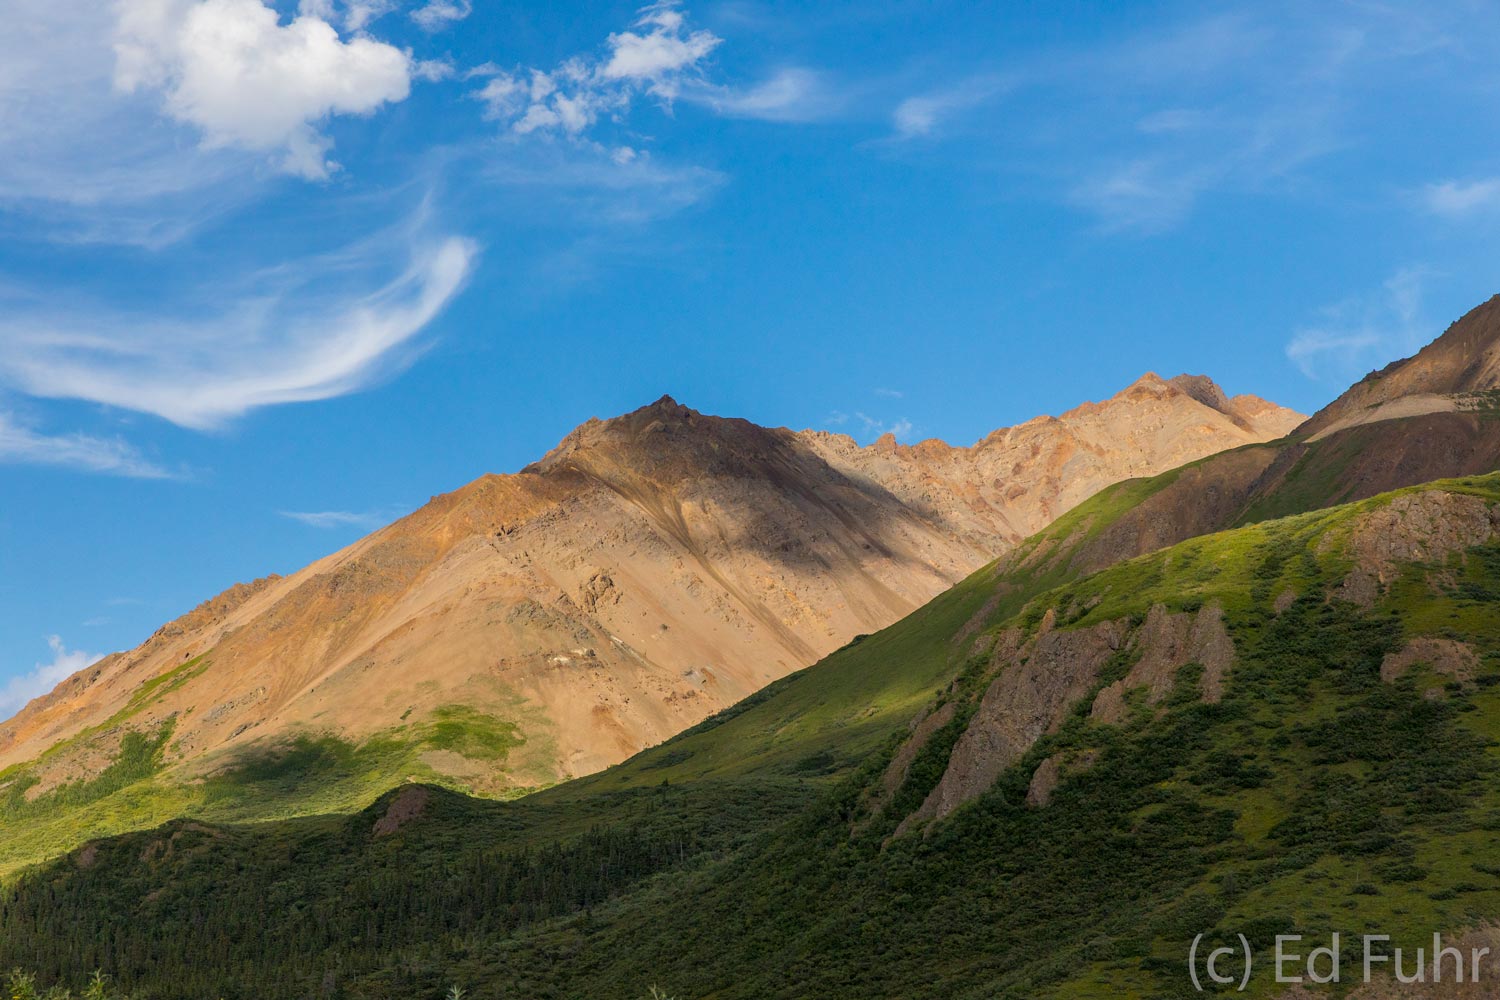 Sable Pass is often one of the best places to spot grizzly bears in Denali National Park.